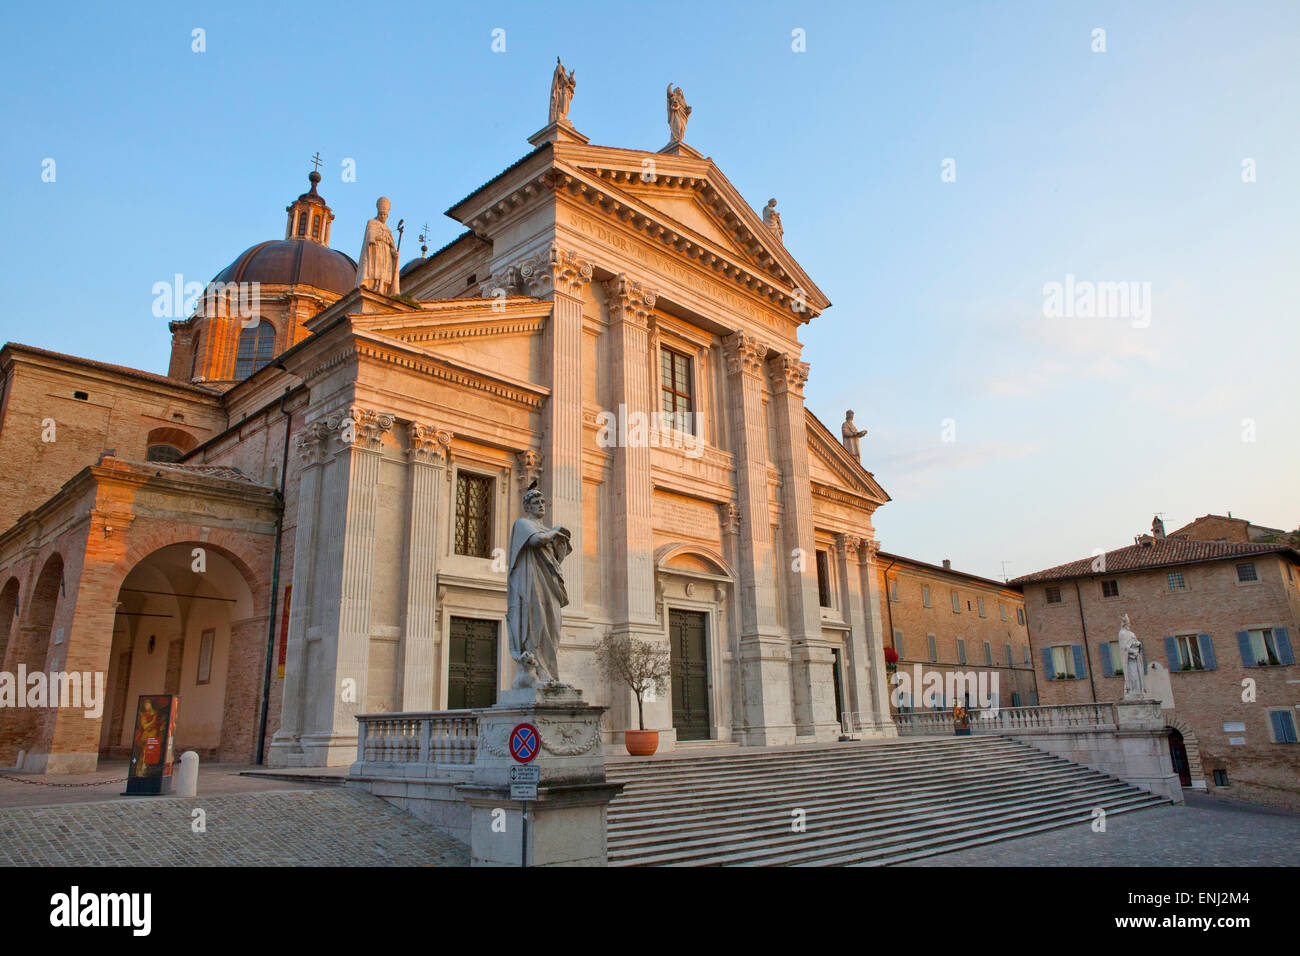 Image of the Duomo of Urbino ( cathedral ) , a church founded in 1021 over a 6th century religious edifice . Urbino is a walled Stock Photo